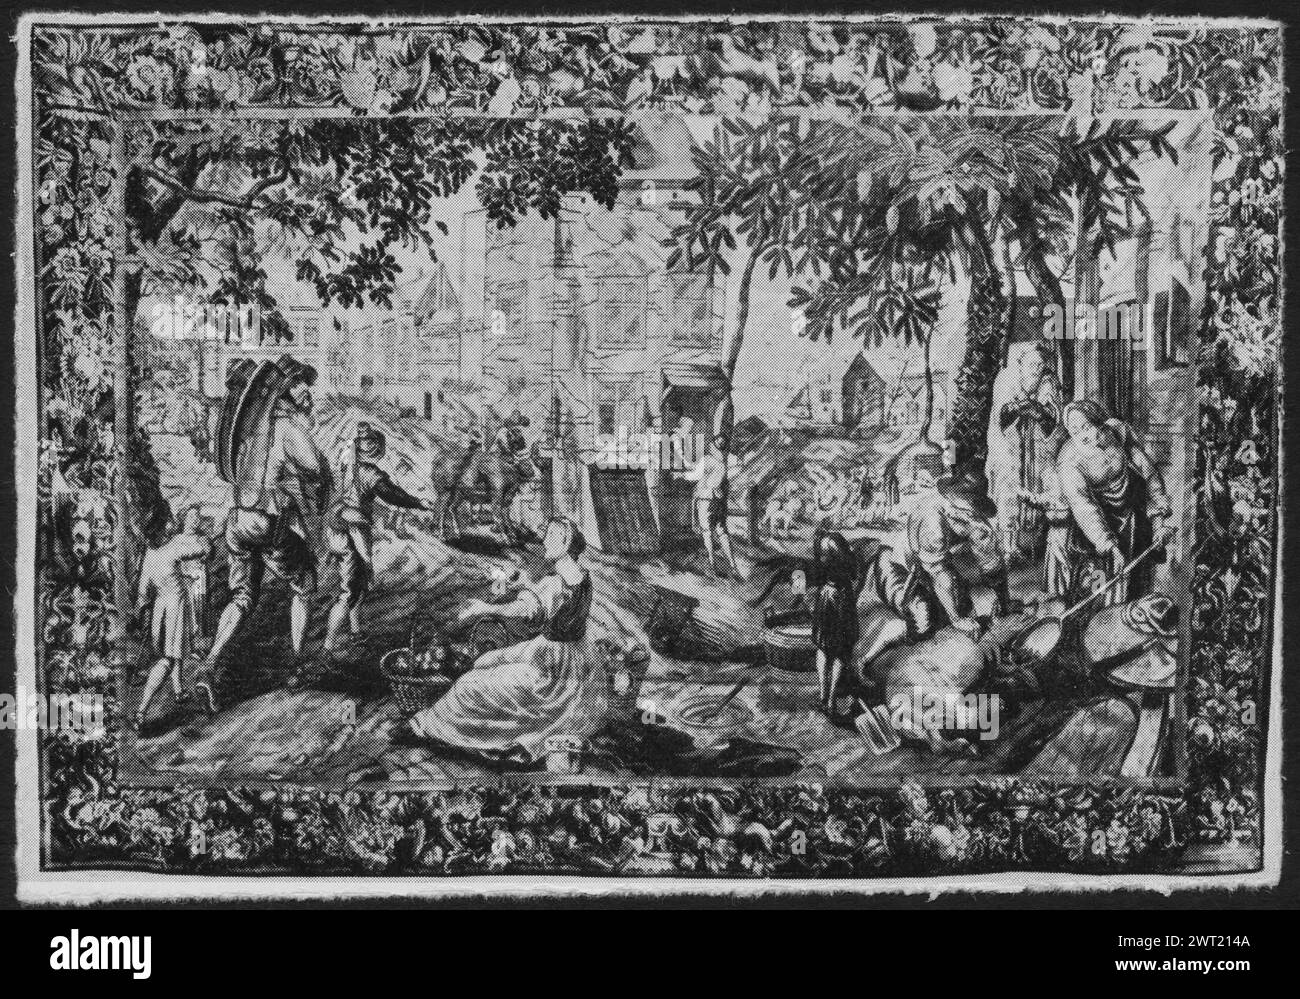 Pig slaughtering. unknown c. 1690-1710 Tapestry Materials/Techniques: unknown Culture: Flemish Weaving Center: Antwerp In open space before manor, various groups of figures, including man carrying load & turning towards onlooker (L, foreground), seated maid with fruit filled basket (L of center), man killing pig next to boy & woman holding out bowl on long handle to catch blood (R); before inn, man with cow (L of center, middle ground), & man conversing with maid (R of center); houses & figures visible in background (BRD) garland of flowers & fruits interspersed with dogs & other animals Stock Photo